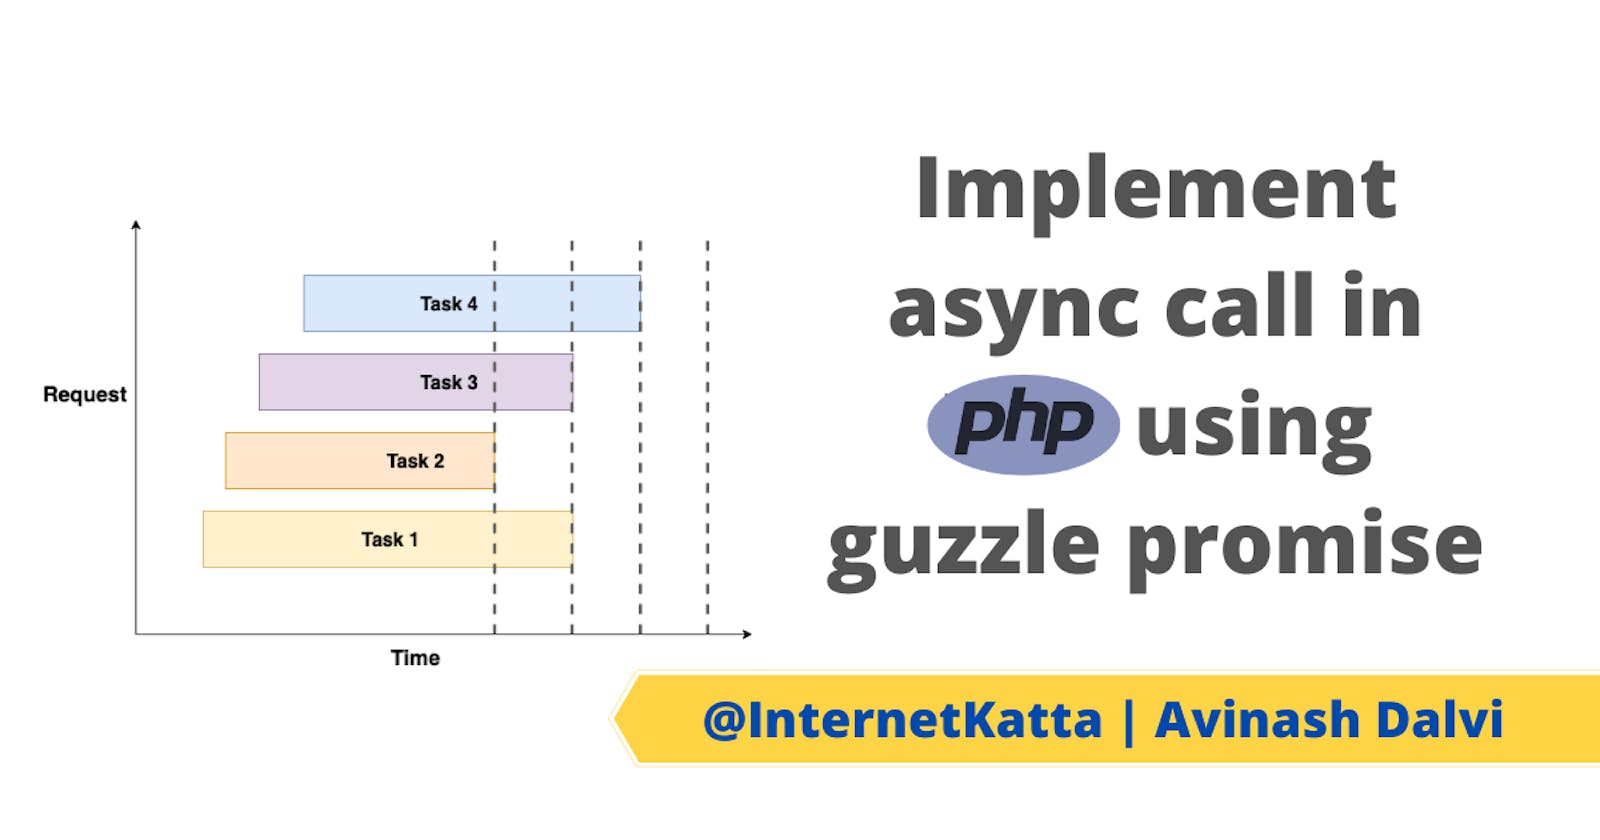 Implement async call in PHP using guzzle promise